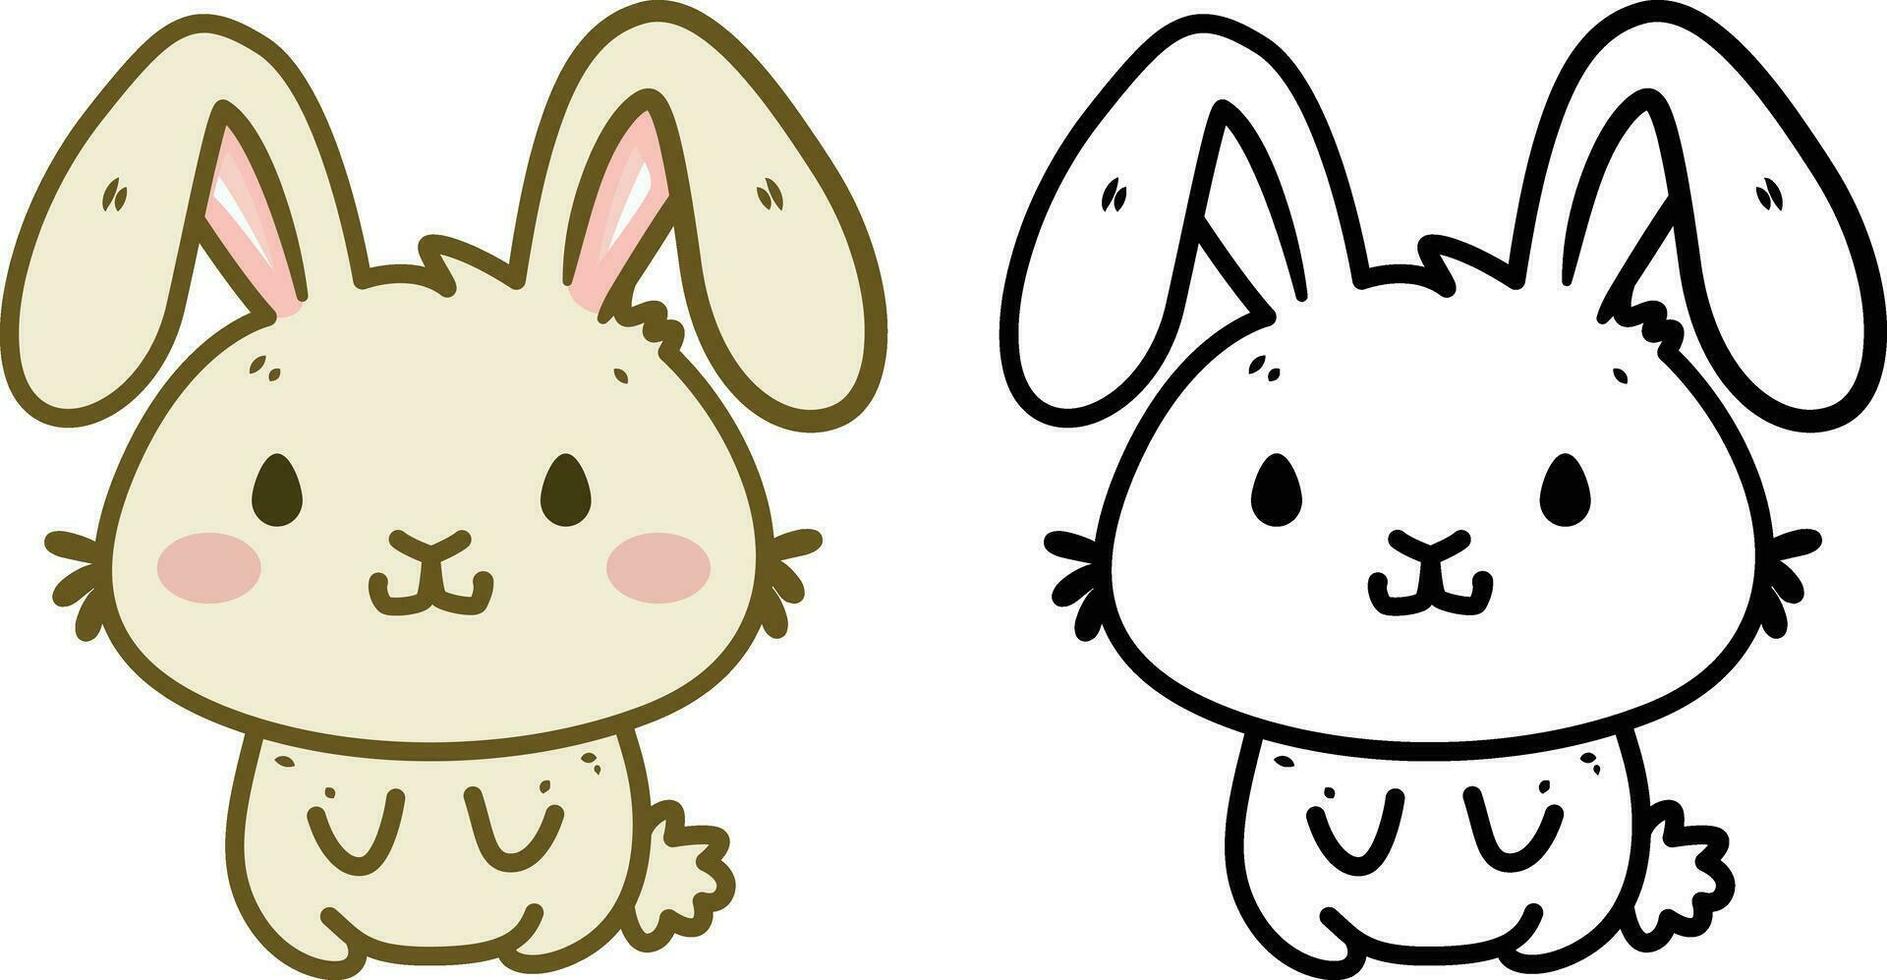 Cute rabbit doodle style vector illustration, Cute bunny cartoon doodle style colored and black and white line art stock vector image